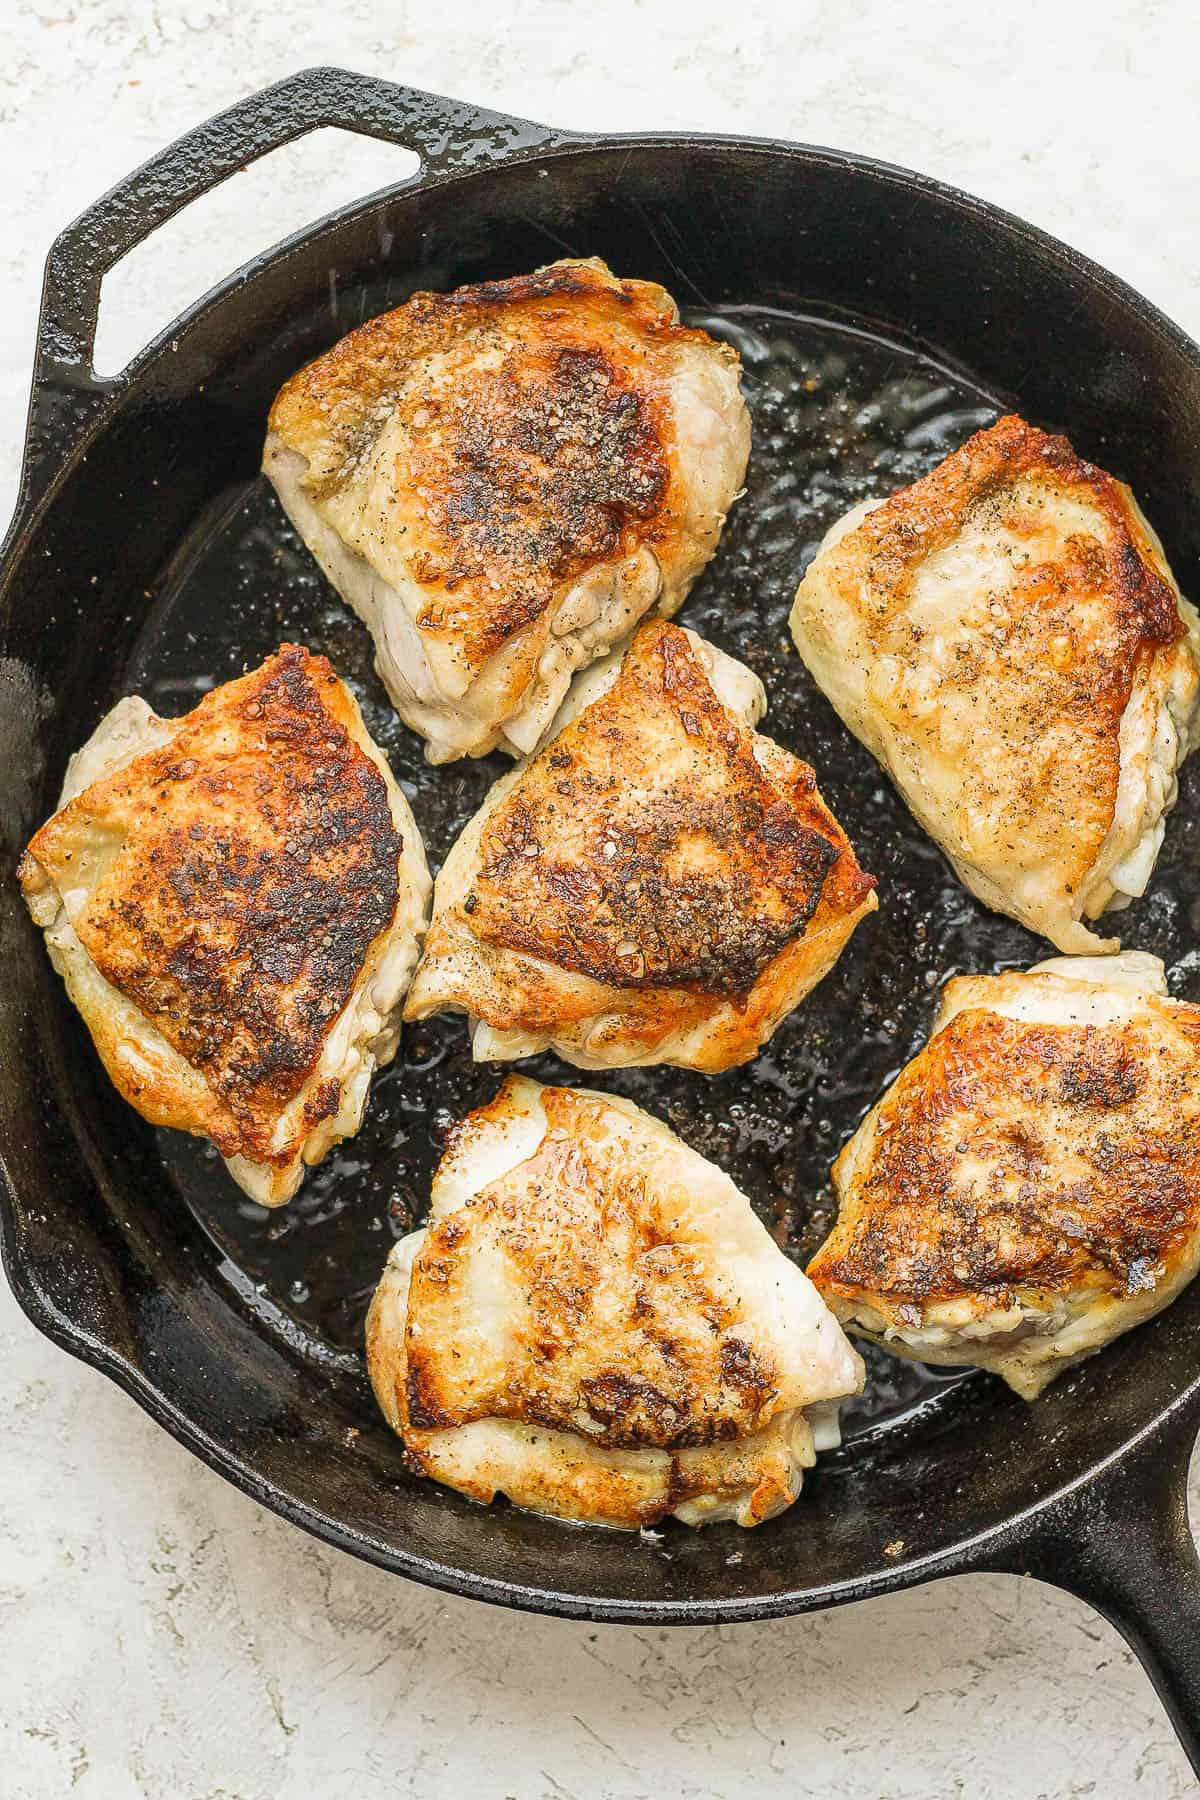 Seared chicken thighs in the cast iron skillet.